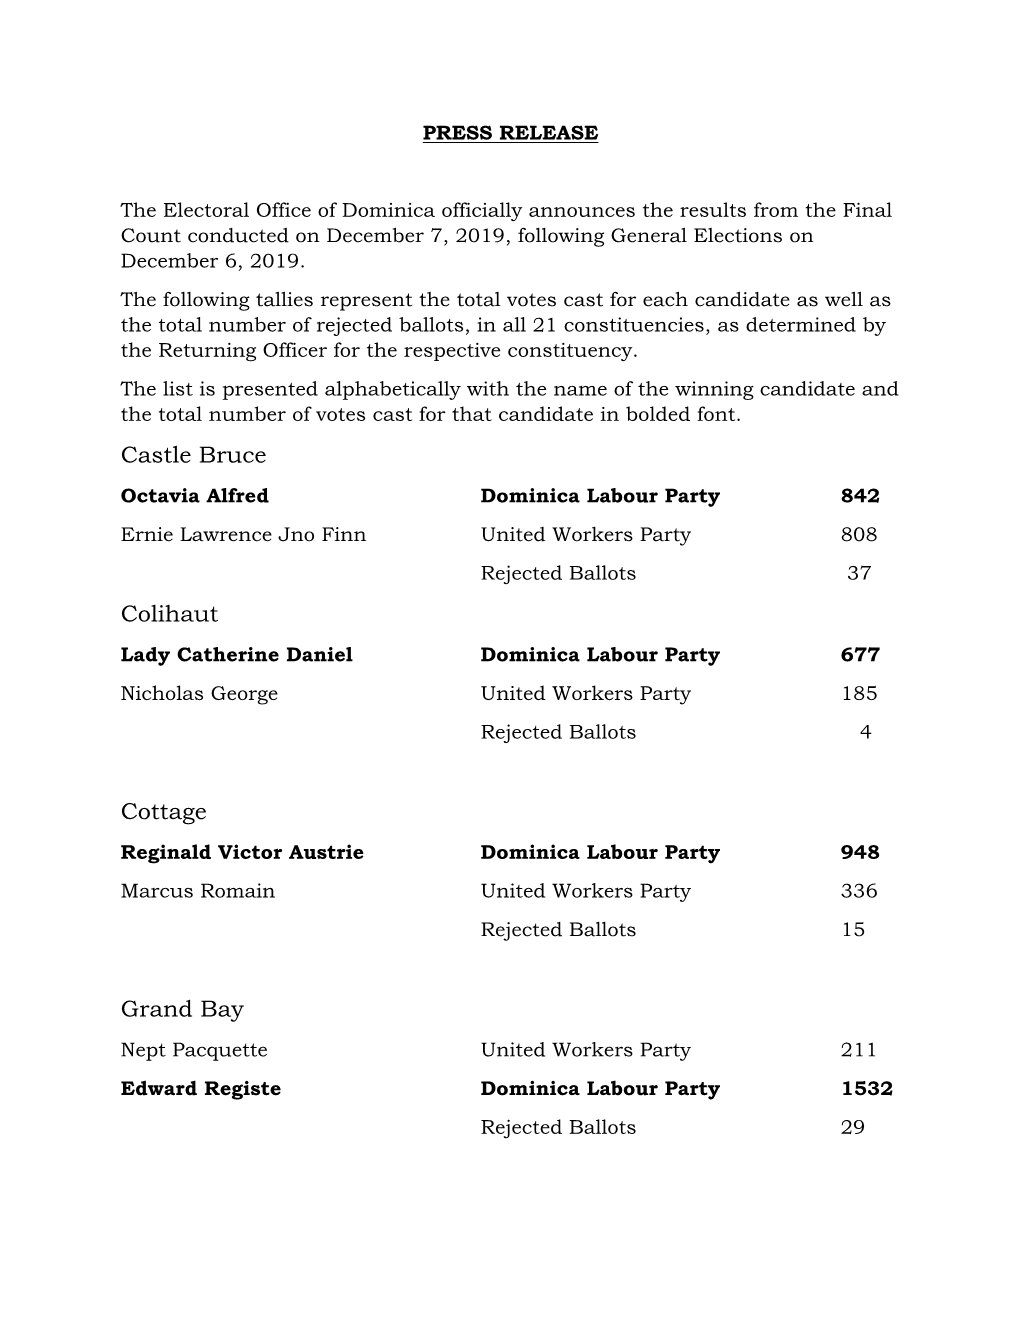 General Elections Final Results